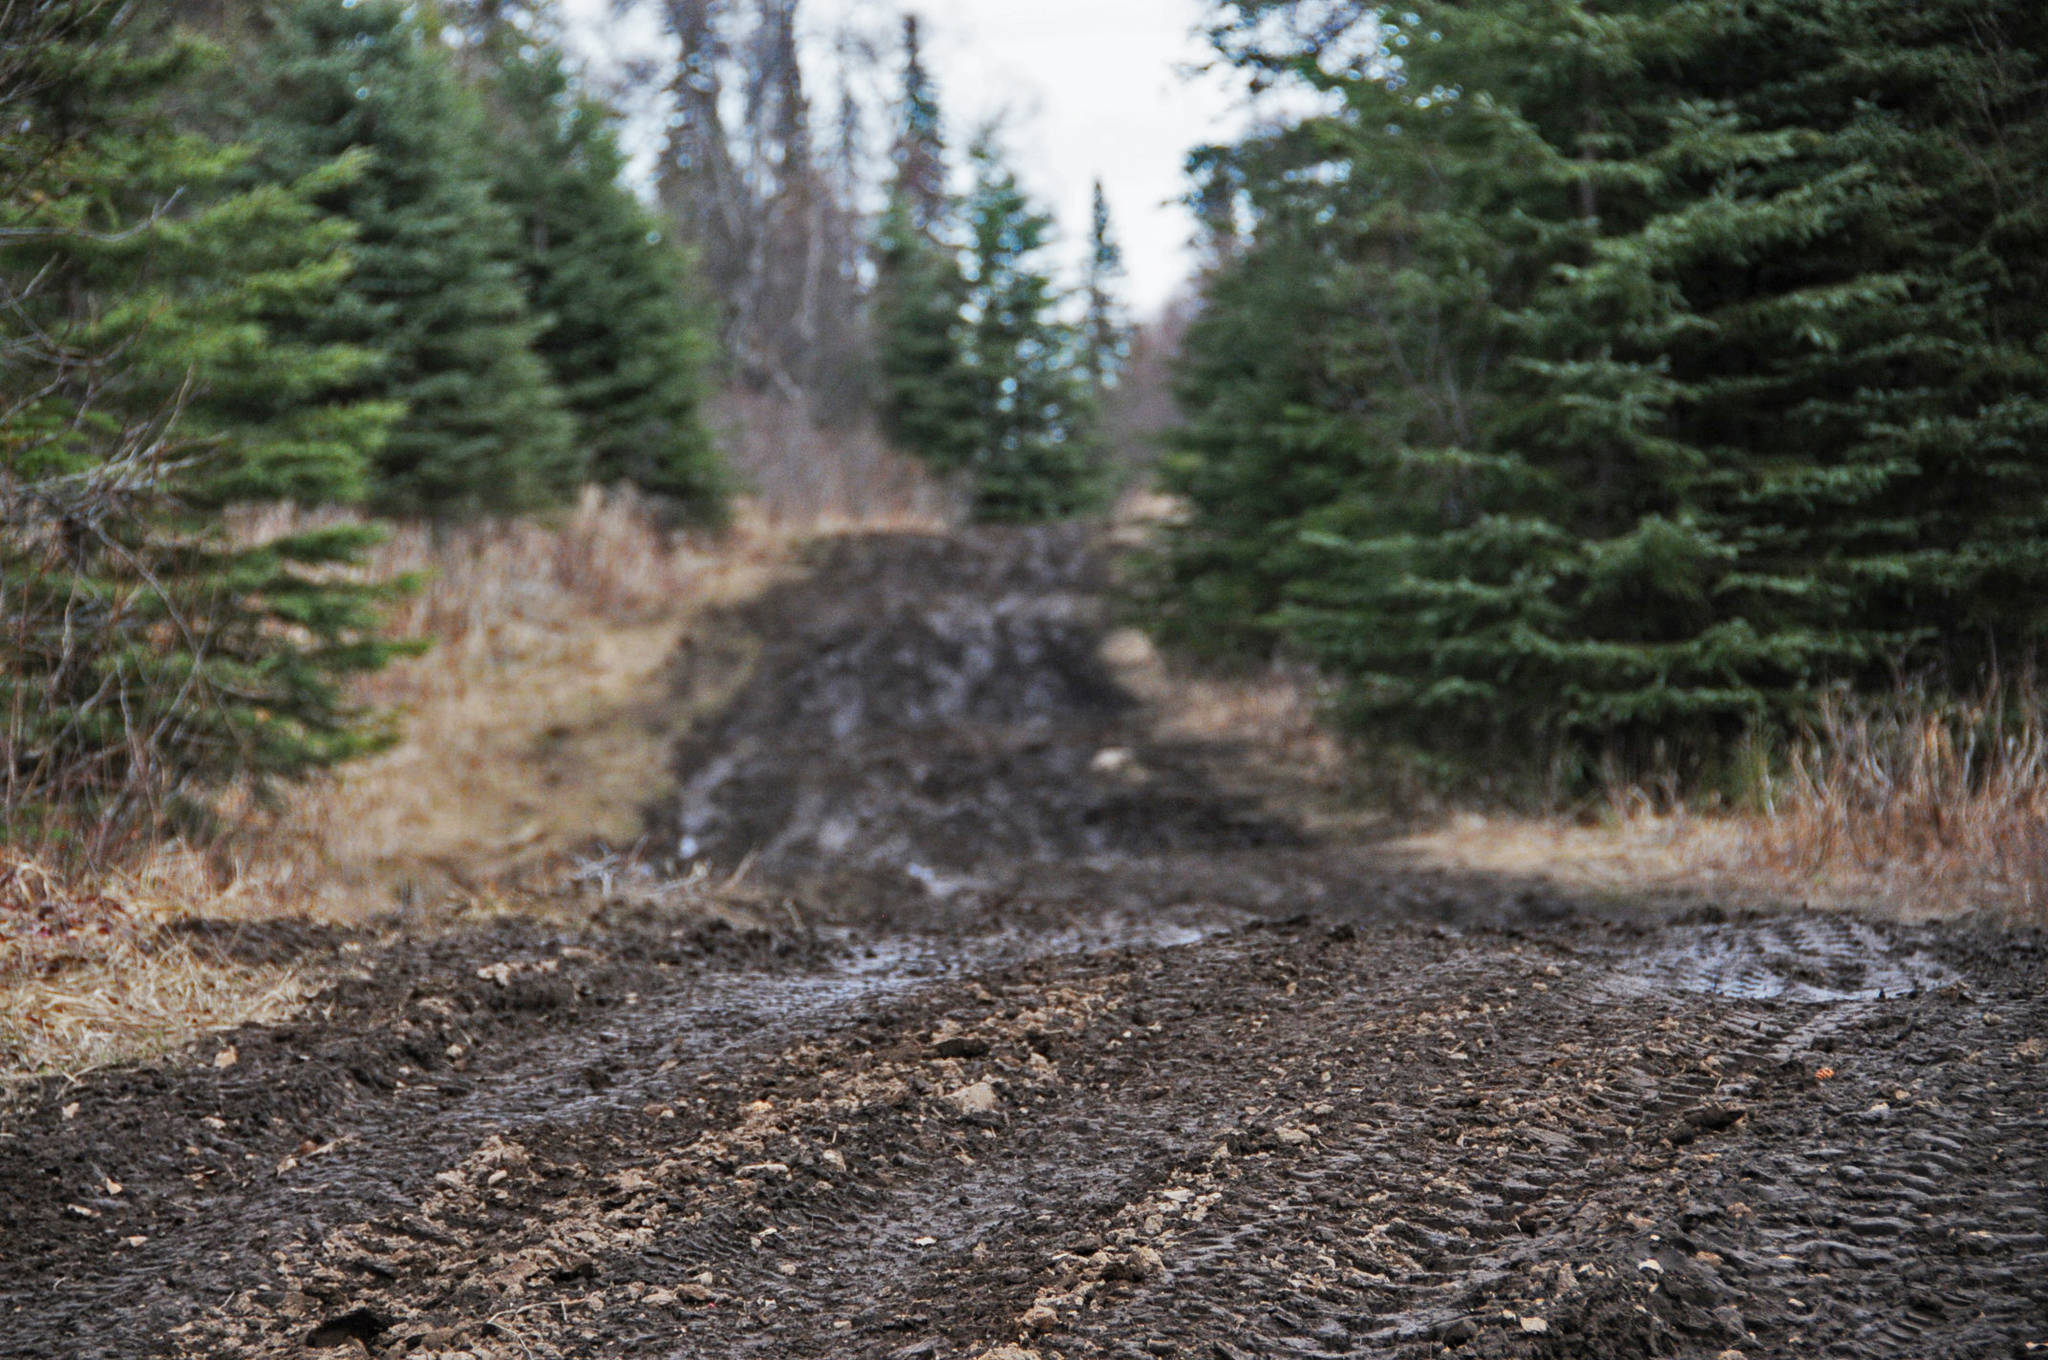 The road to Gray Cliff and Moose Point is a narrow, muddy path, shown on Monday, April 11, 2016 near Nikiski, Alaska. The Kenai Peninsula Borough is working on plans to extend a gravel road toward the subdivisions north of Nikiski. (Photo by Elizabeth Earl/Peninsula Clarion, file)